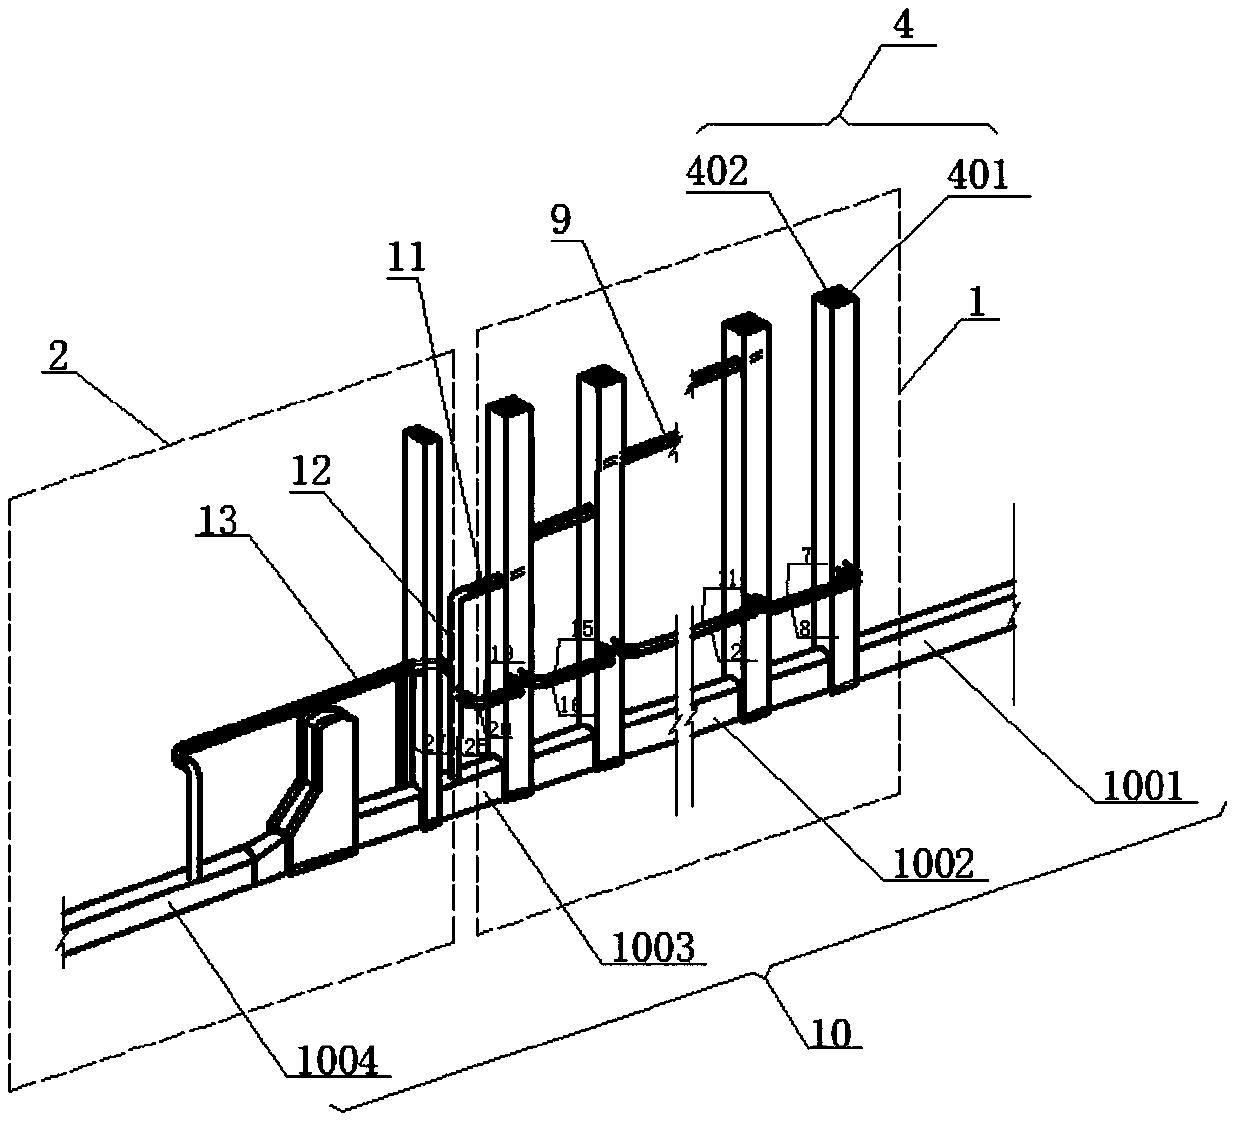 Multi-stage water retaining and emptying system for high dam engineering